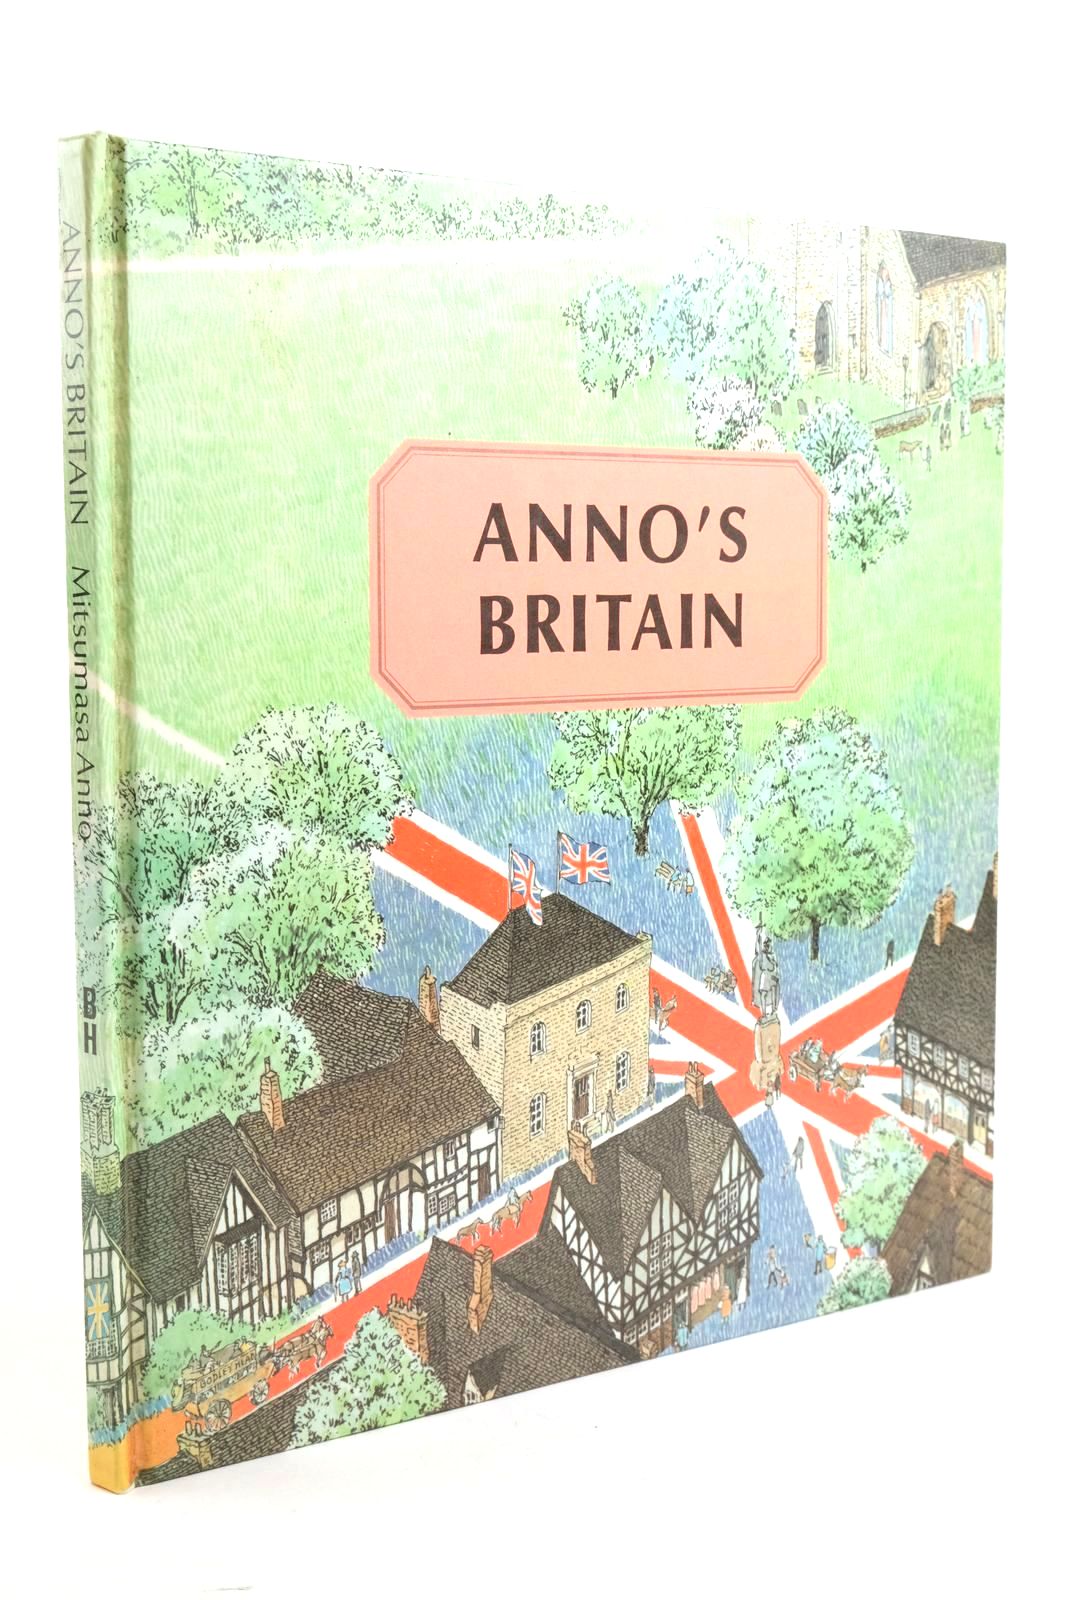 Photo of ANNO'S BRITAIN written by Anno, Mitsumasa illustrated by Anno, Mitsumasa published by The Bodley Head (STOCK CODE: 1322060)  for sale by Stella & Rose's Books